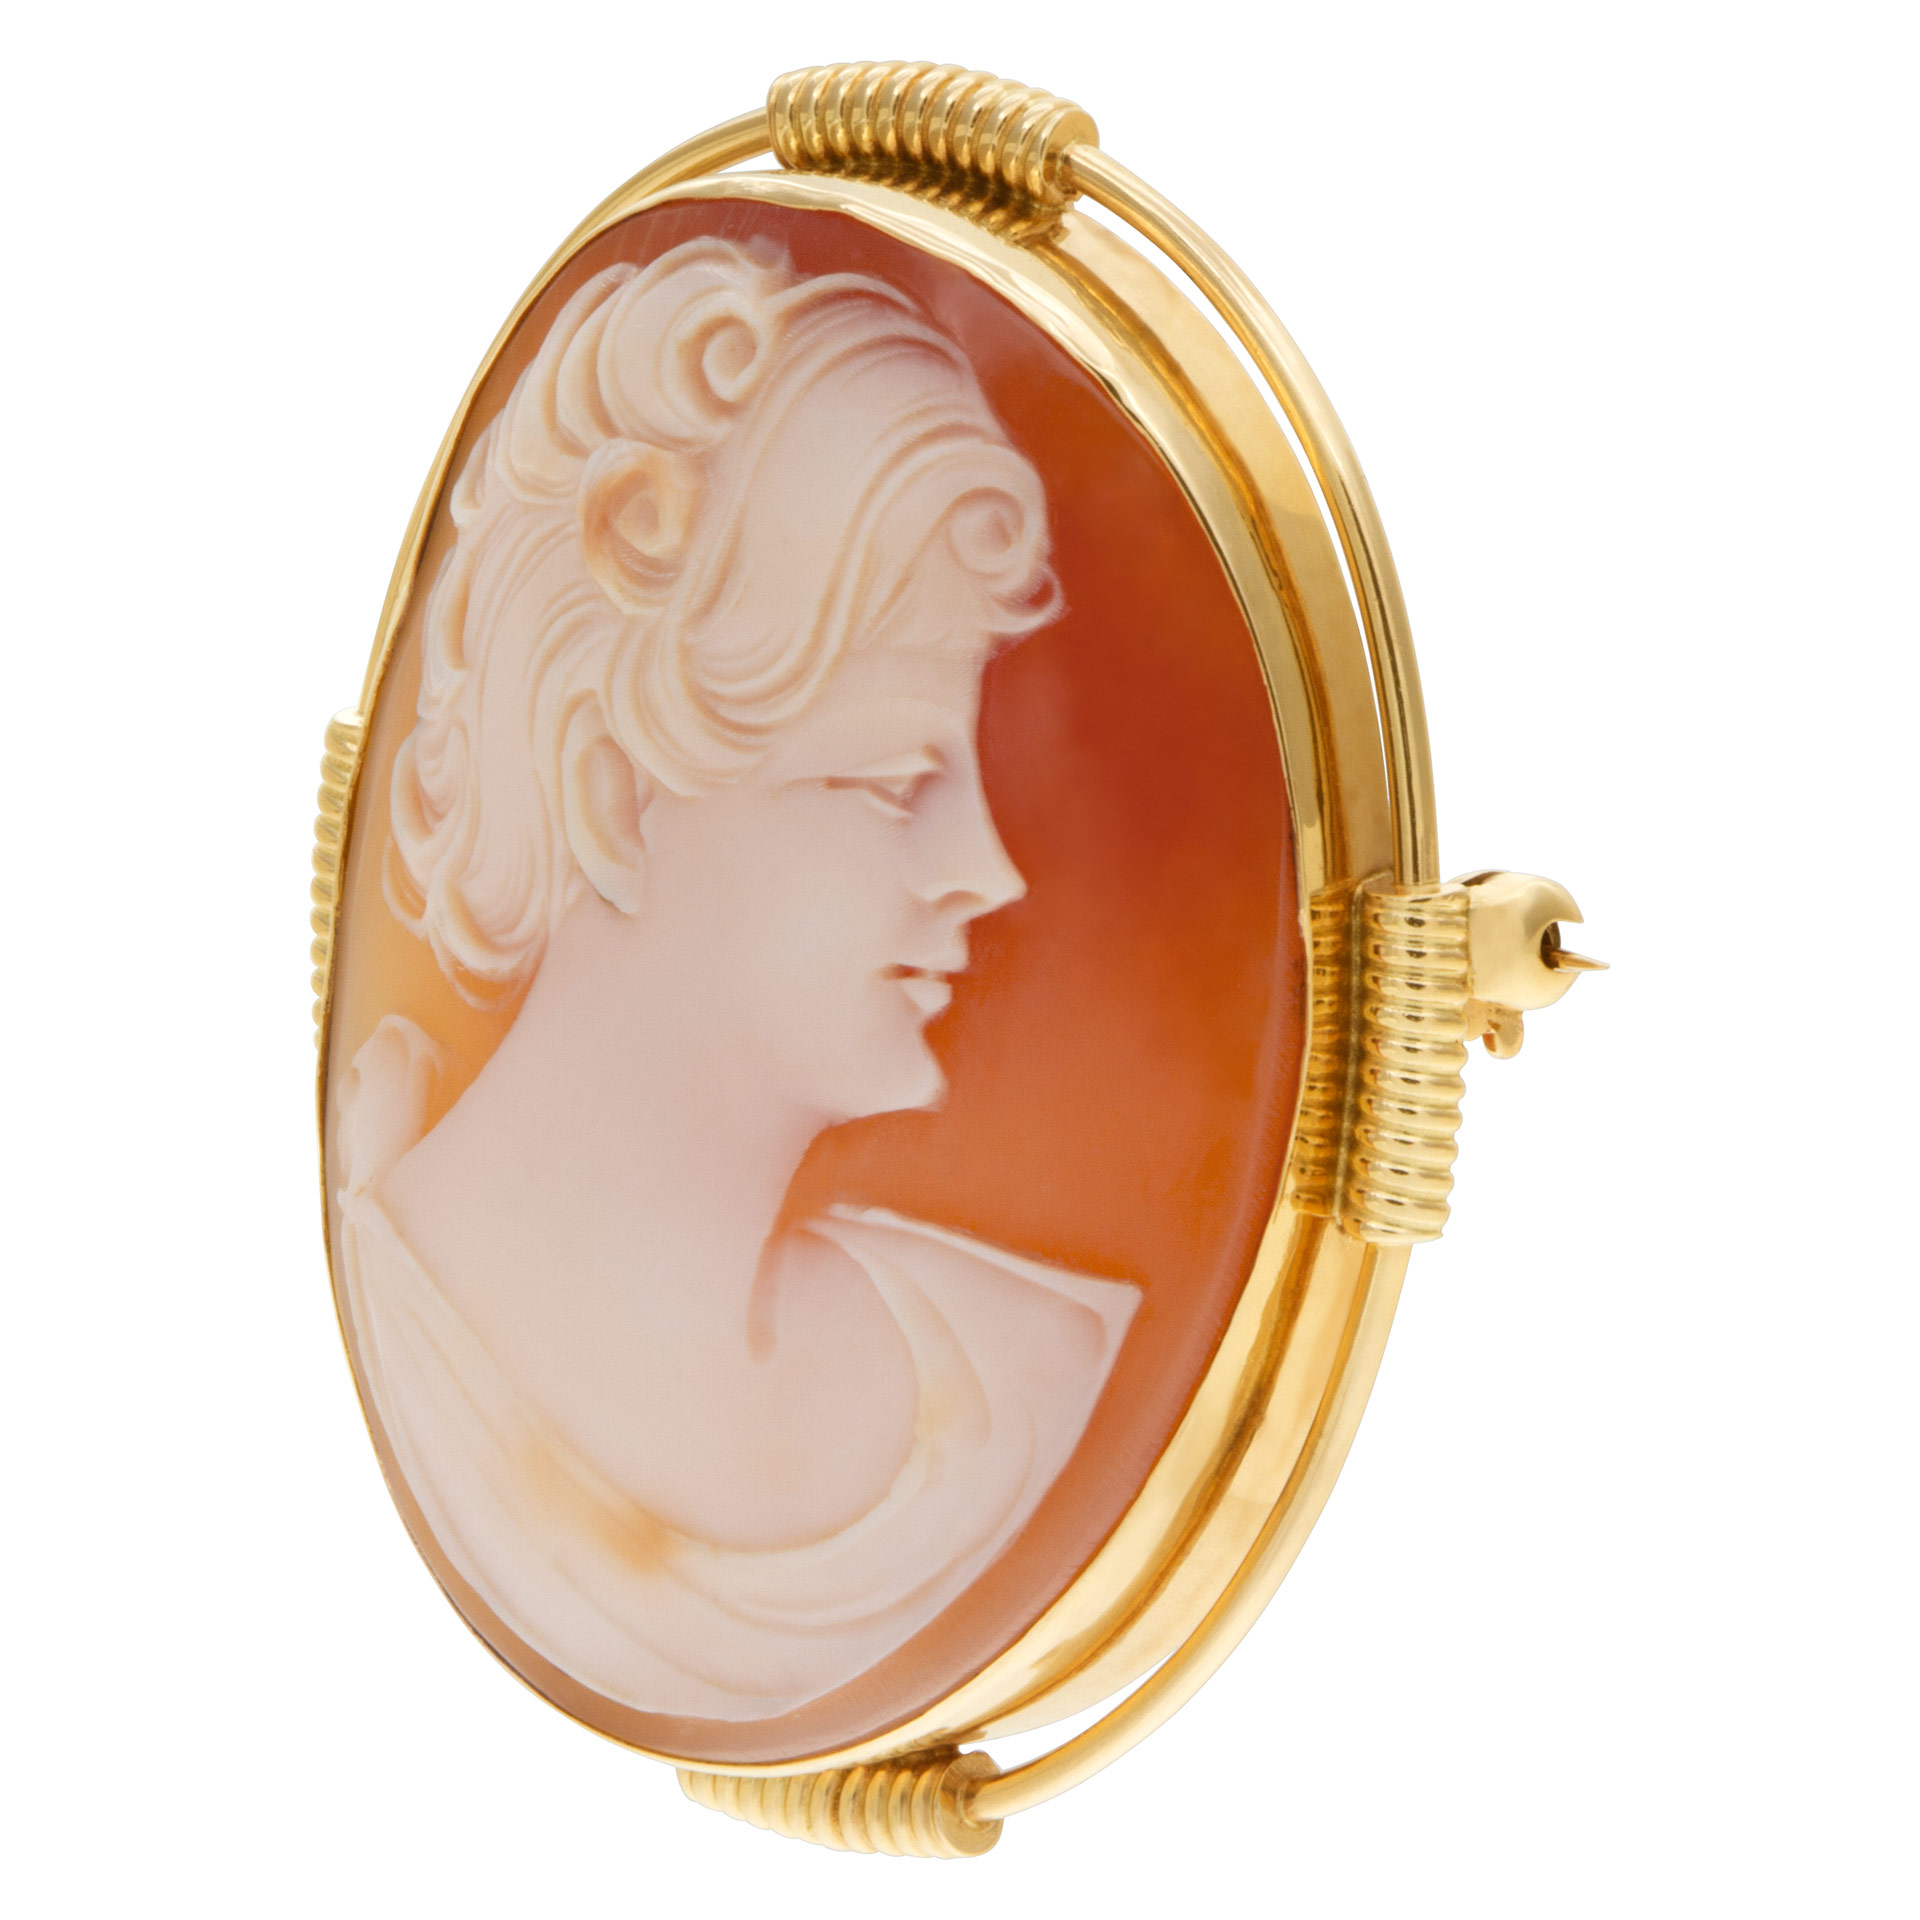 Shell Cameo pin/pendant portrait of a short hair lady set in 14k yellow gold. image 2